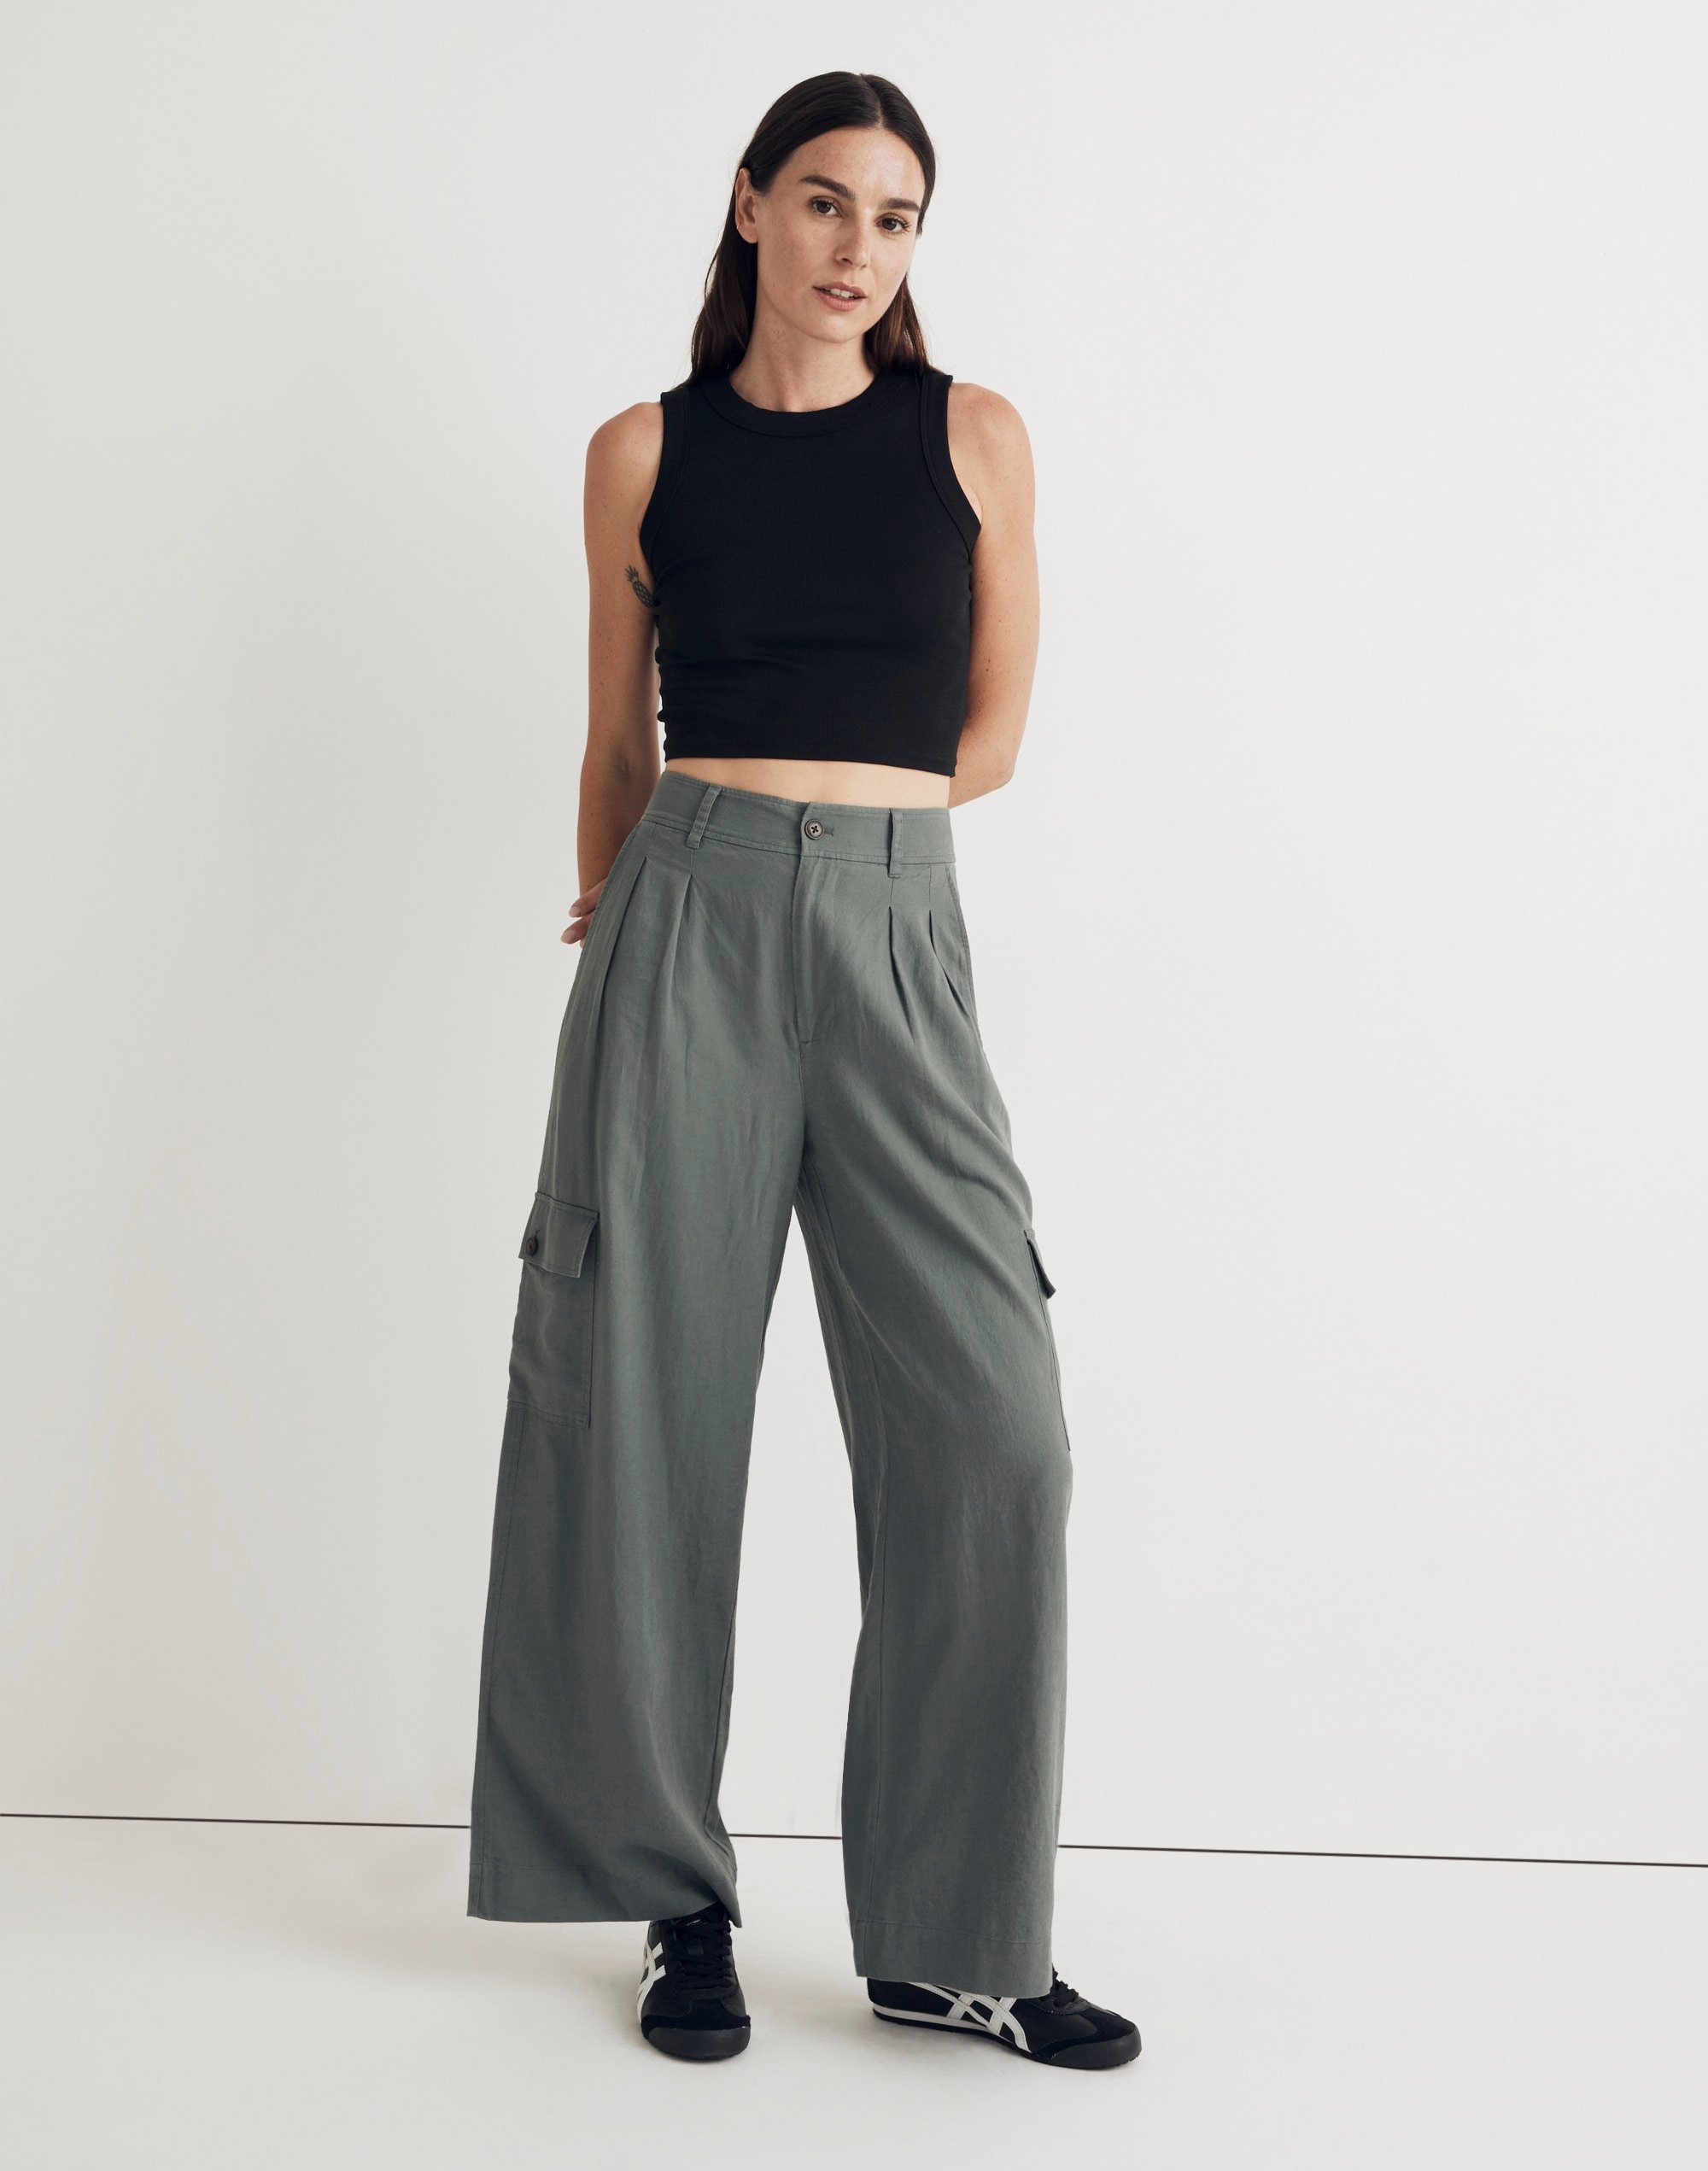 Trending Wholesale 3/4 cargo pants for women At Affordable Prices